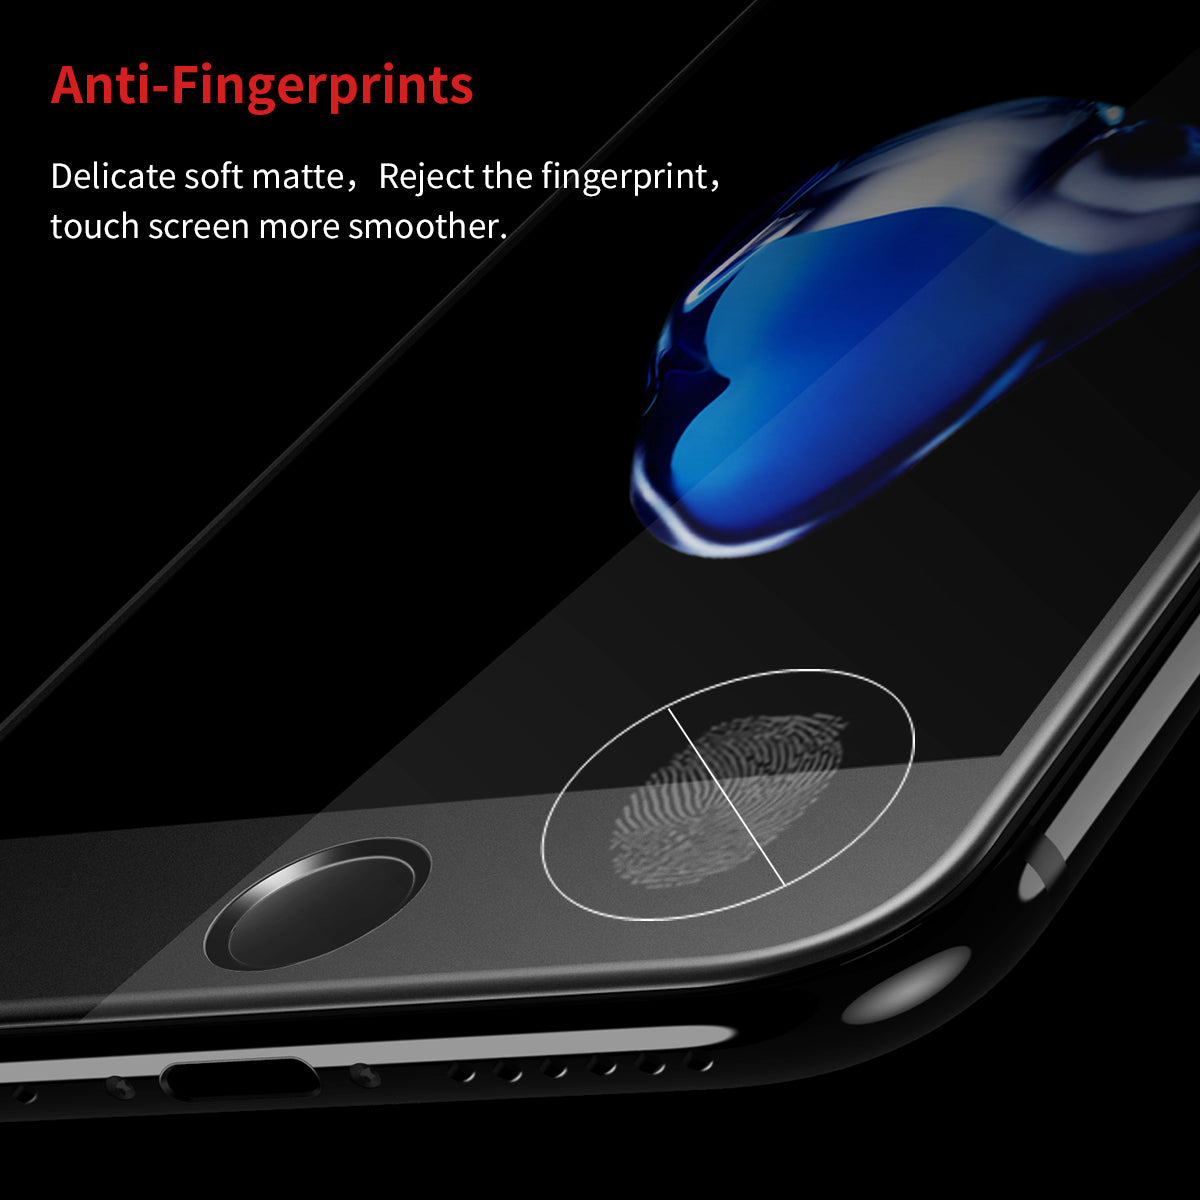 Premium Screen Protector Tempered Glass For iPhone 8 7 3D Frosted Protection Full Cover Glass Film For iPhone 8 7 Plus - Flickdeal.co.nz